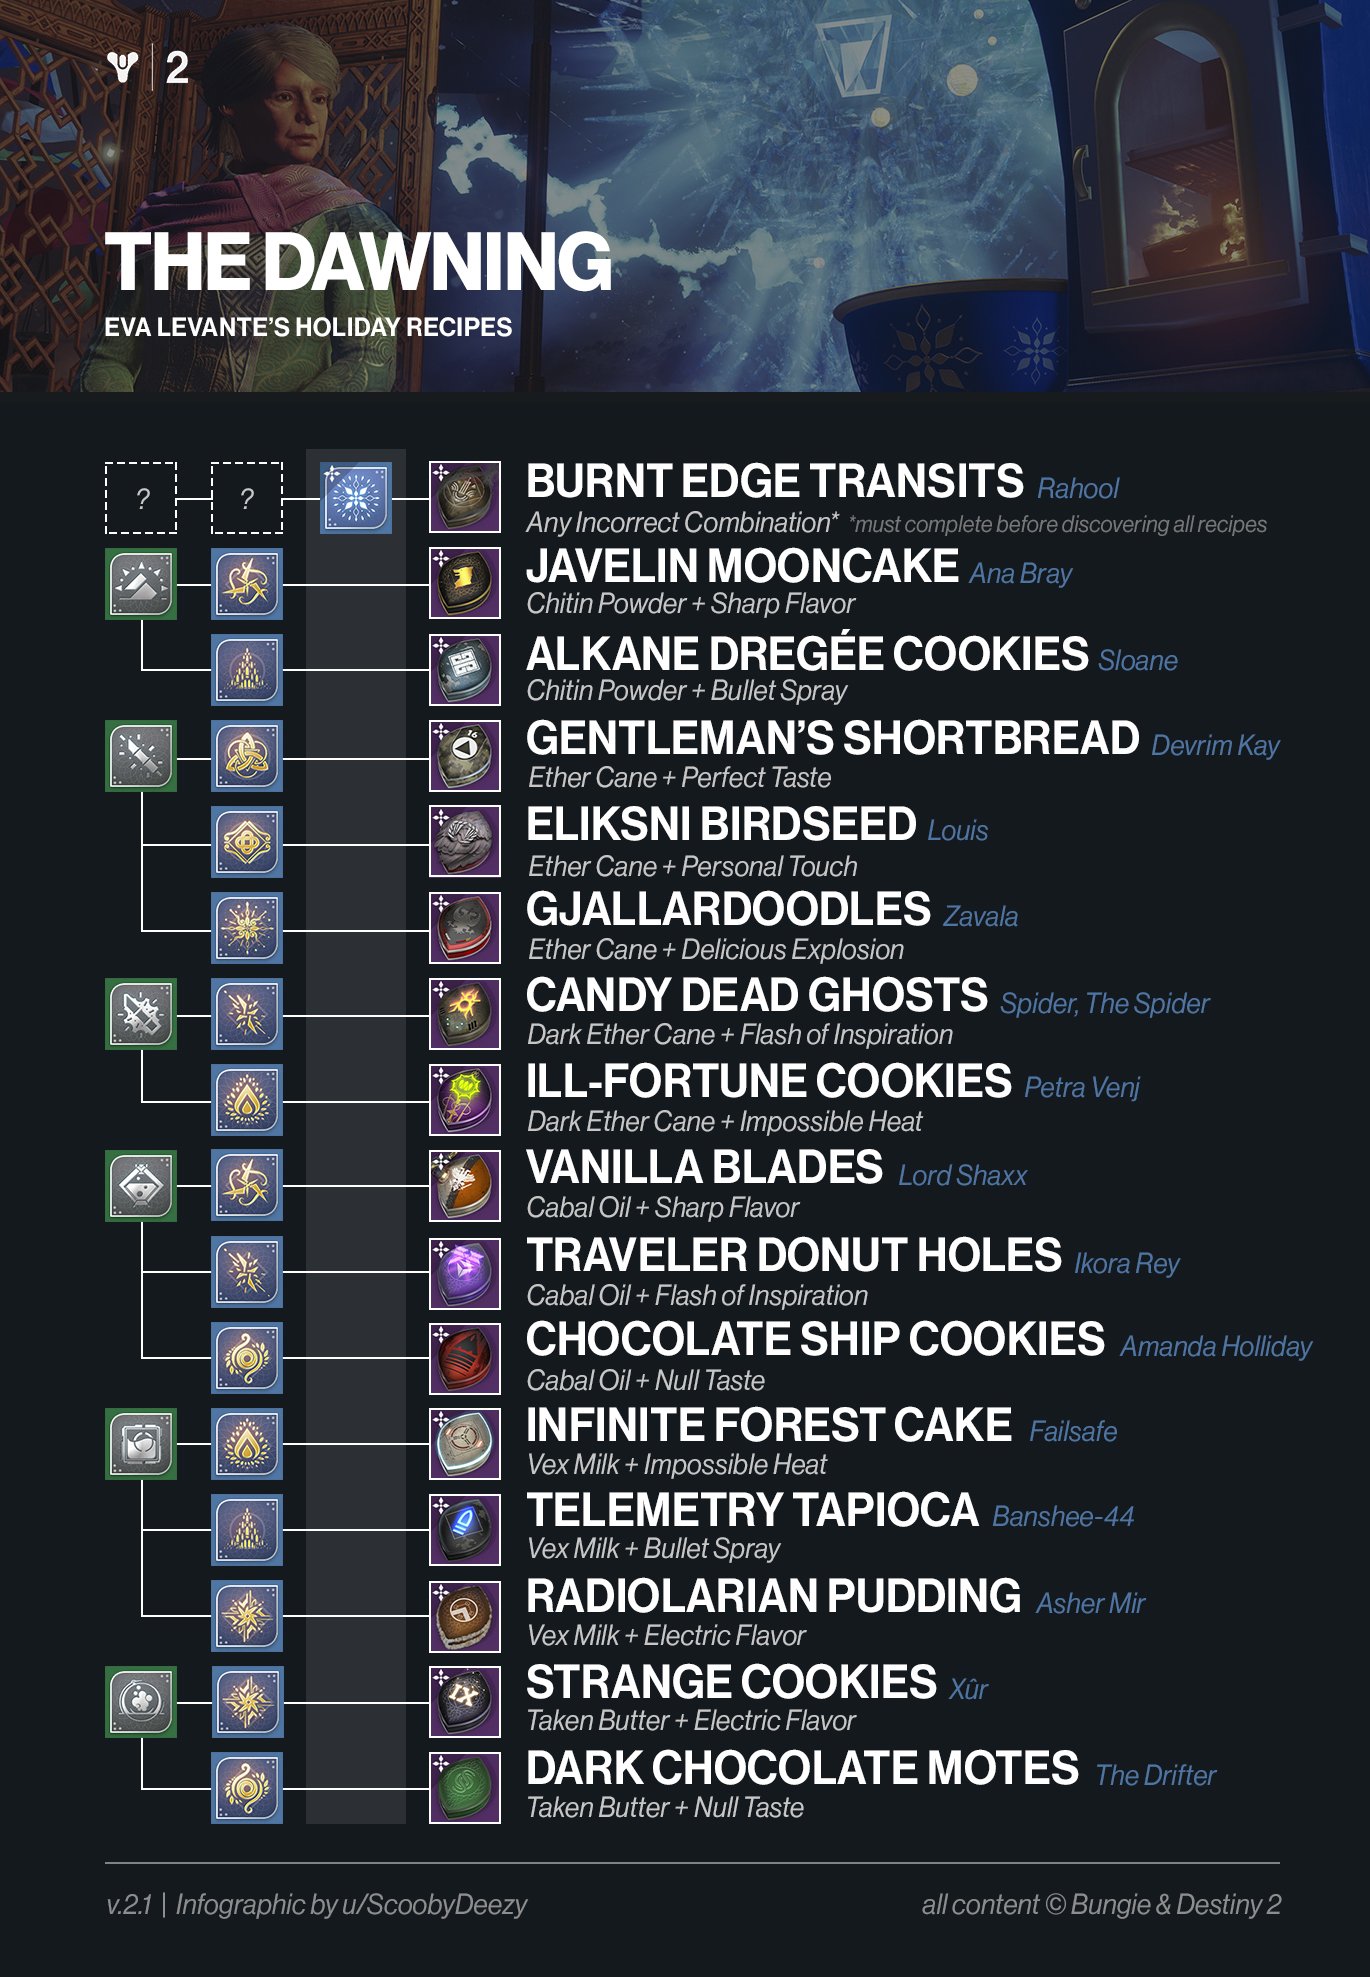 tobben Schaap Cater ScoobyDeezy on Twitter: "For those who still have yet to Masterwork Eva's  Holiday Oven and are looking for more Dawning Recipes (...what game is this  again?), here's an updated Infographic. Go bake